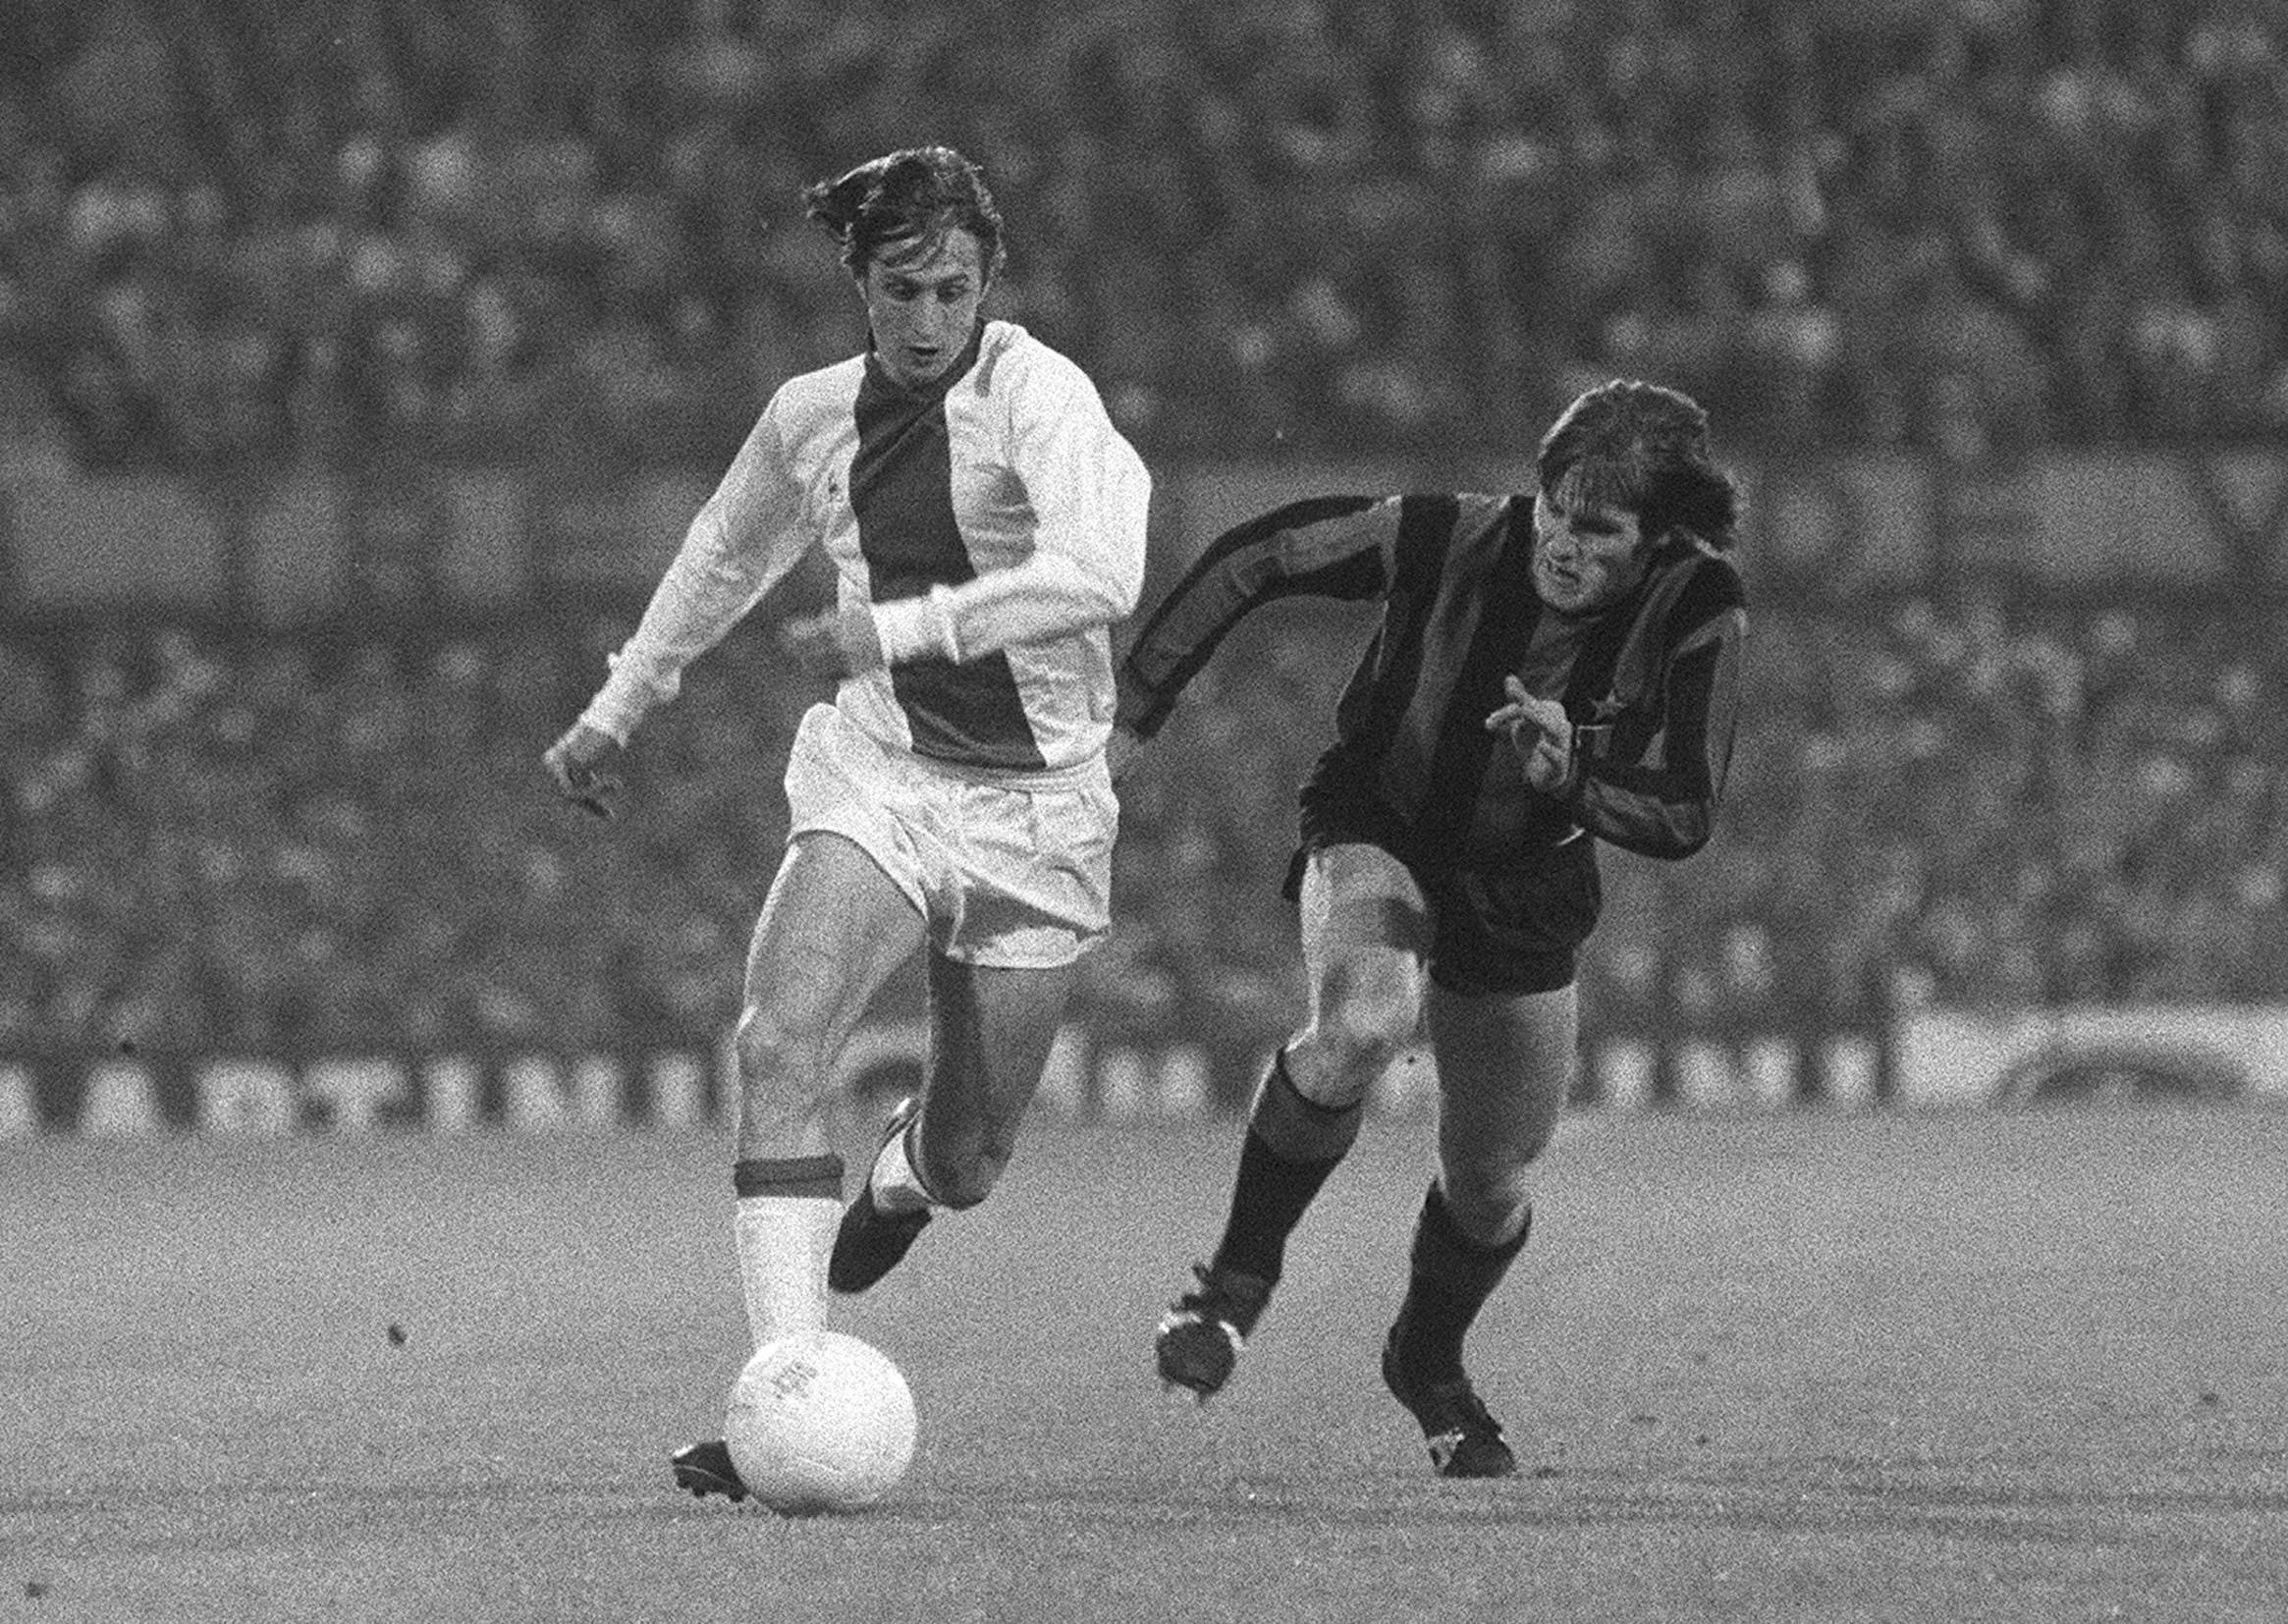 A Data History of the European Cup: 1972, Ajax 2-0 Inter Milan